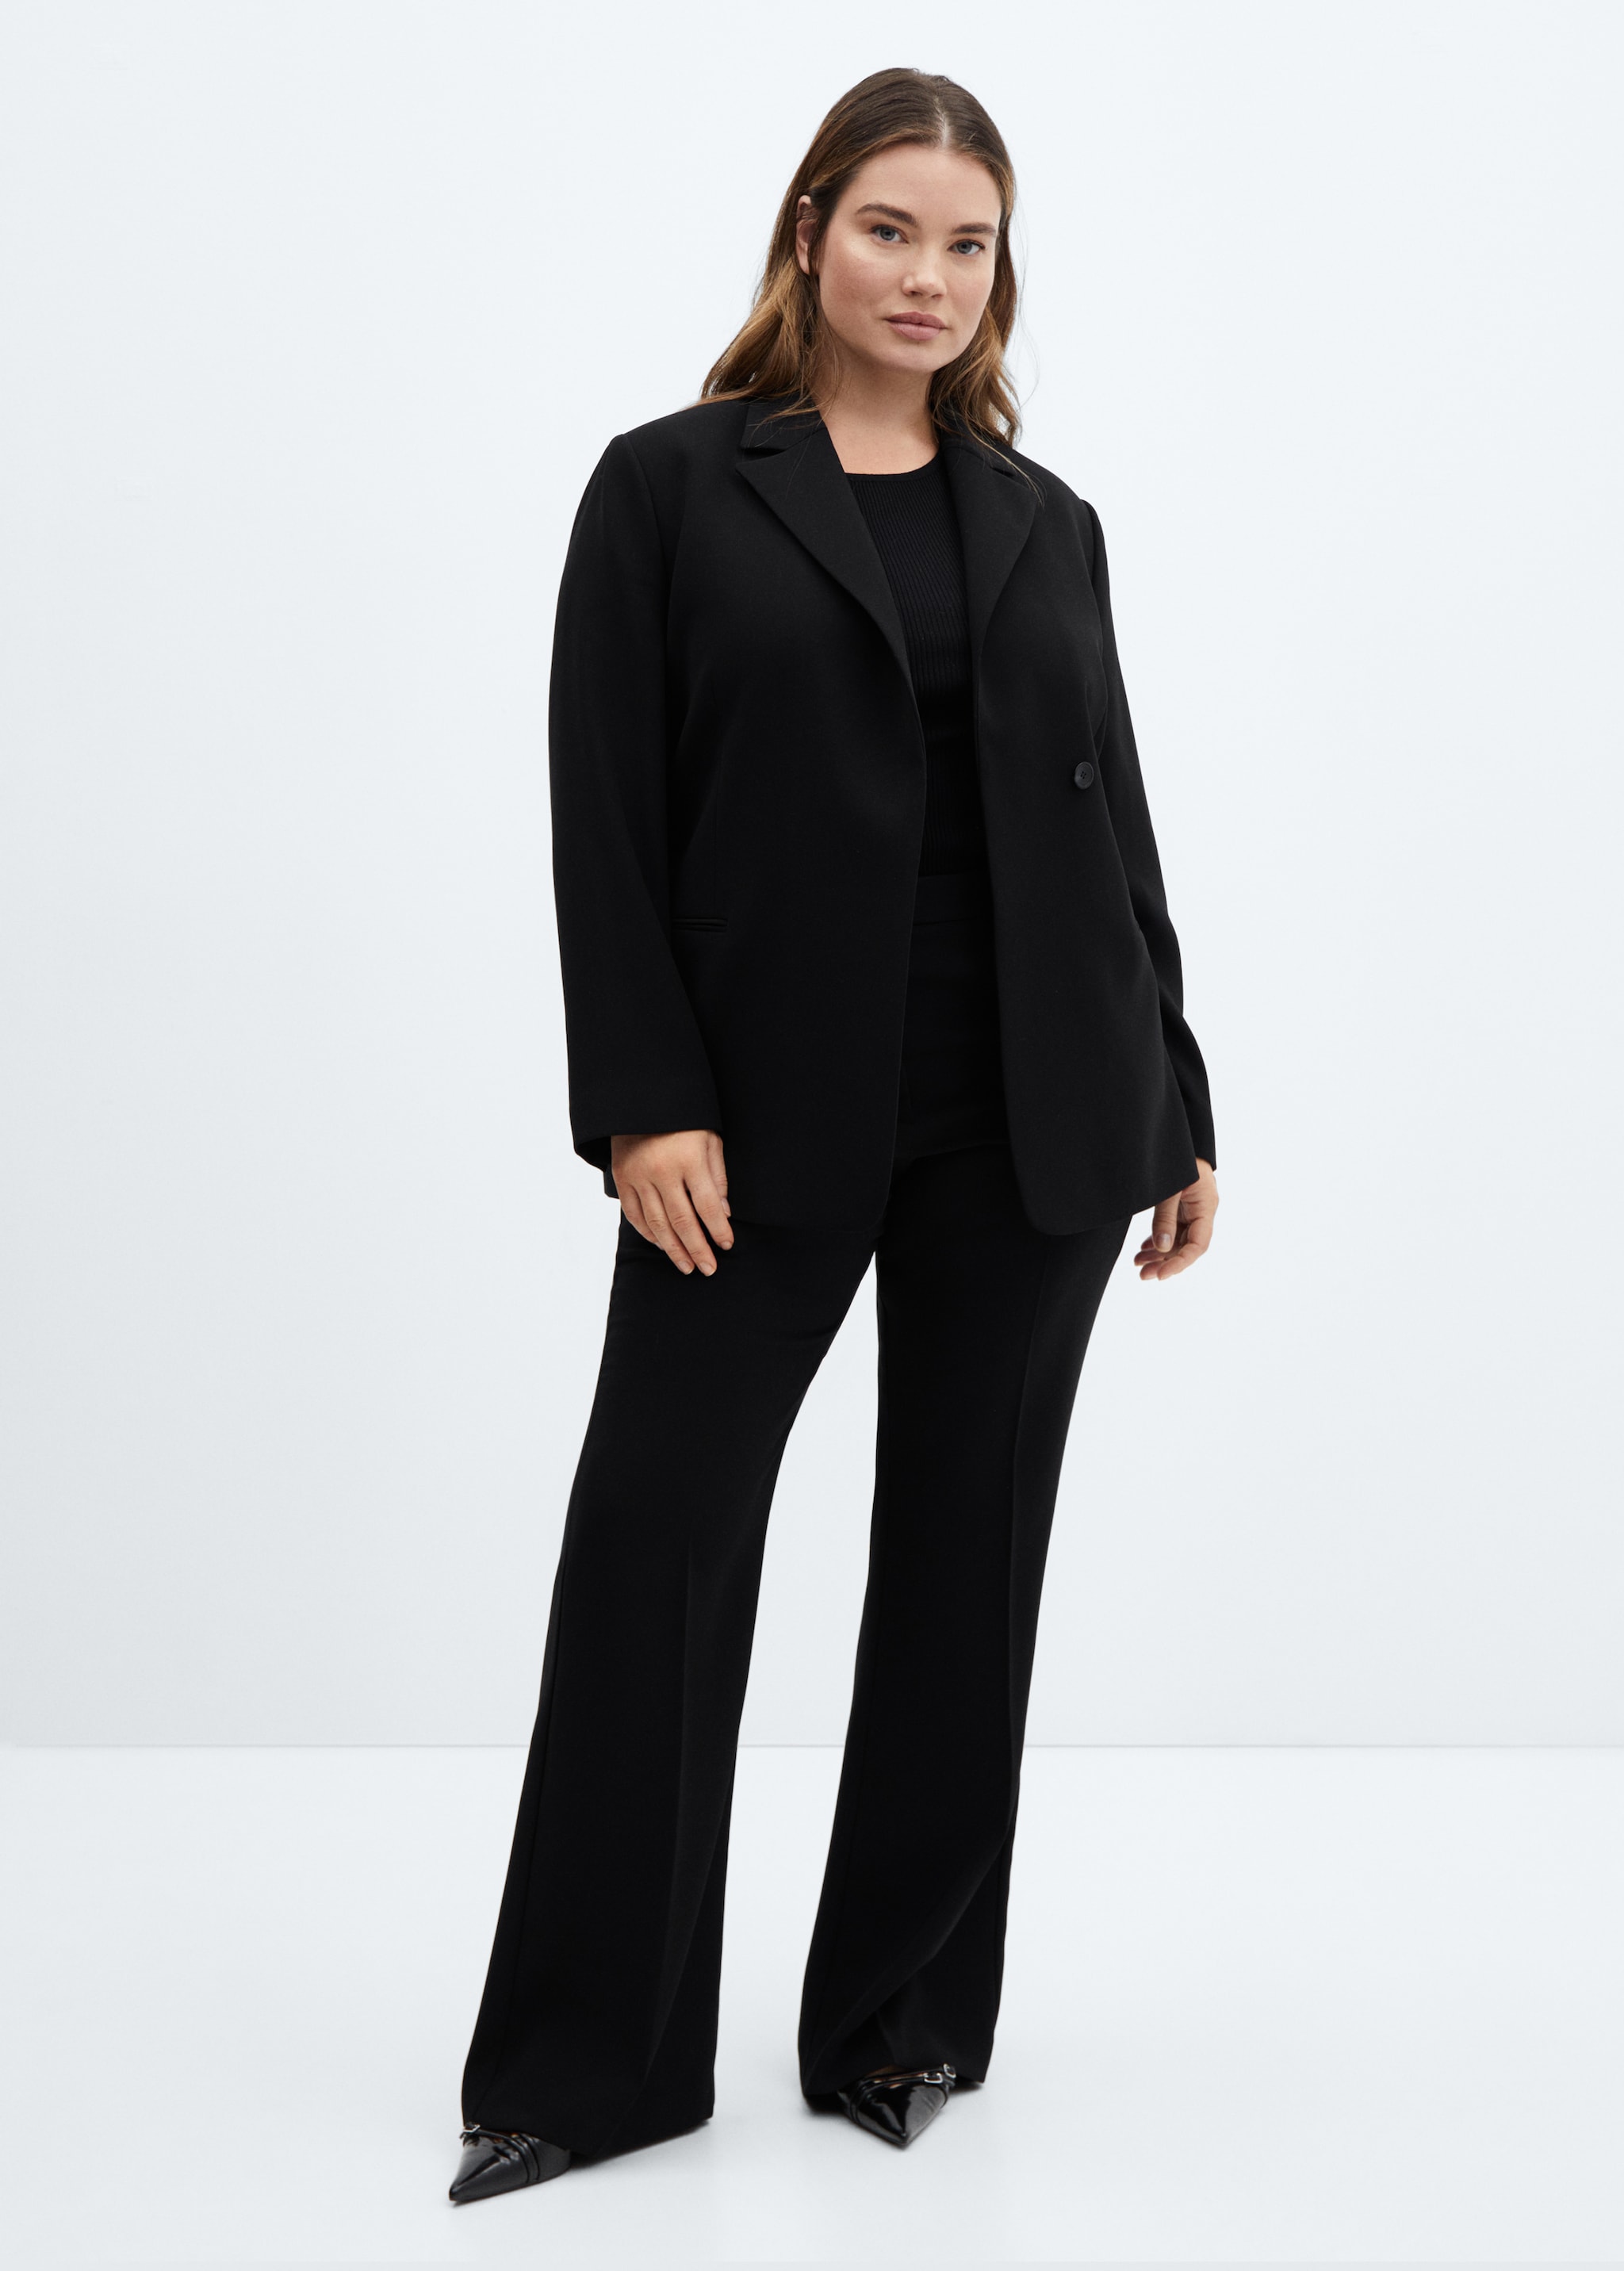 Flared trouser suit - Details of the article 3